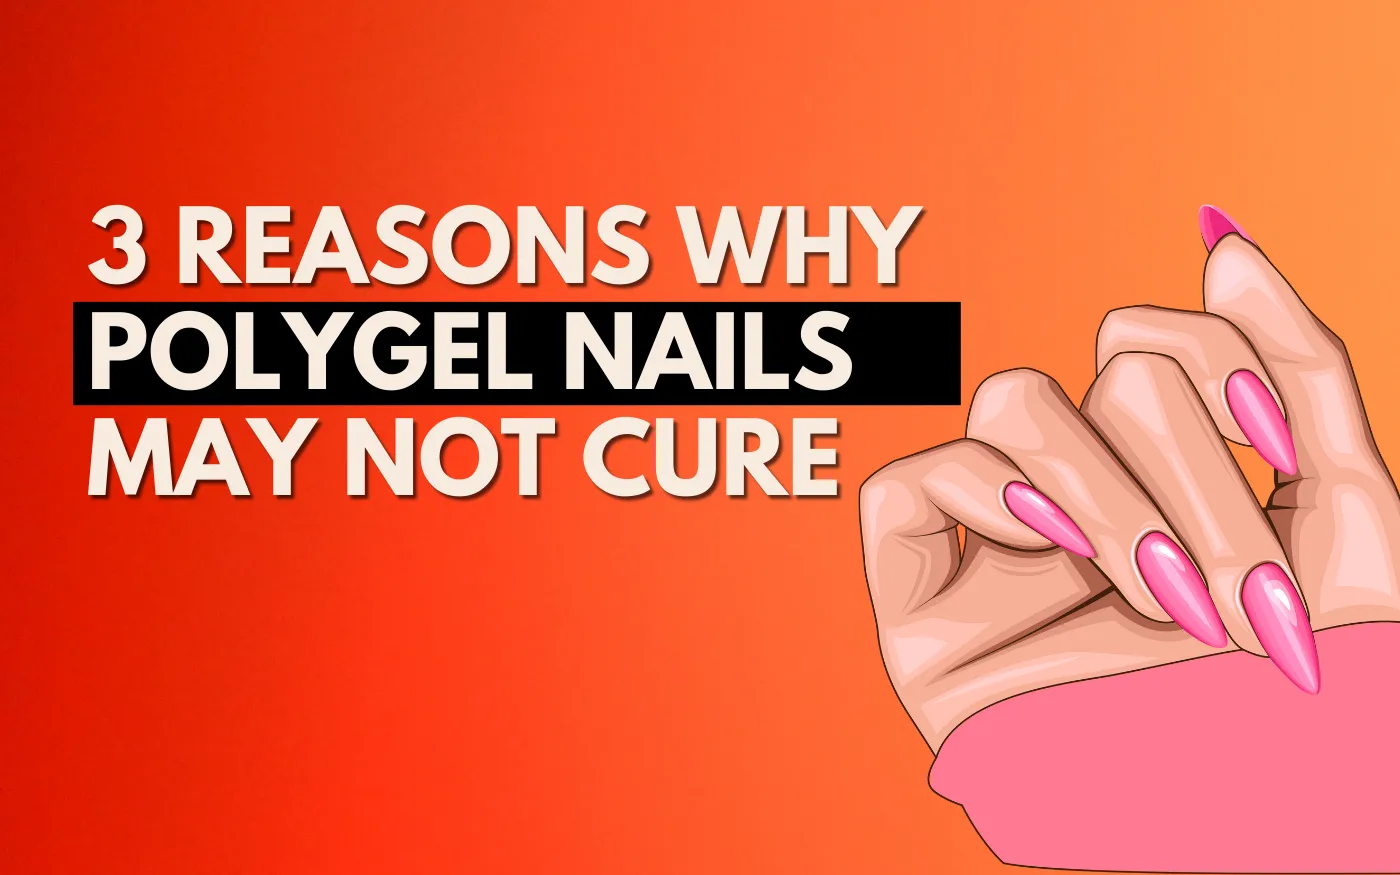 Why Are My Polygel Nails Not Curing? [Tips]